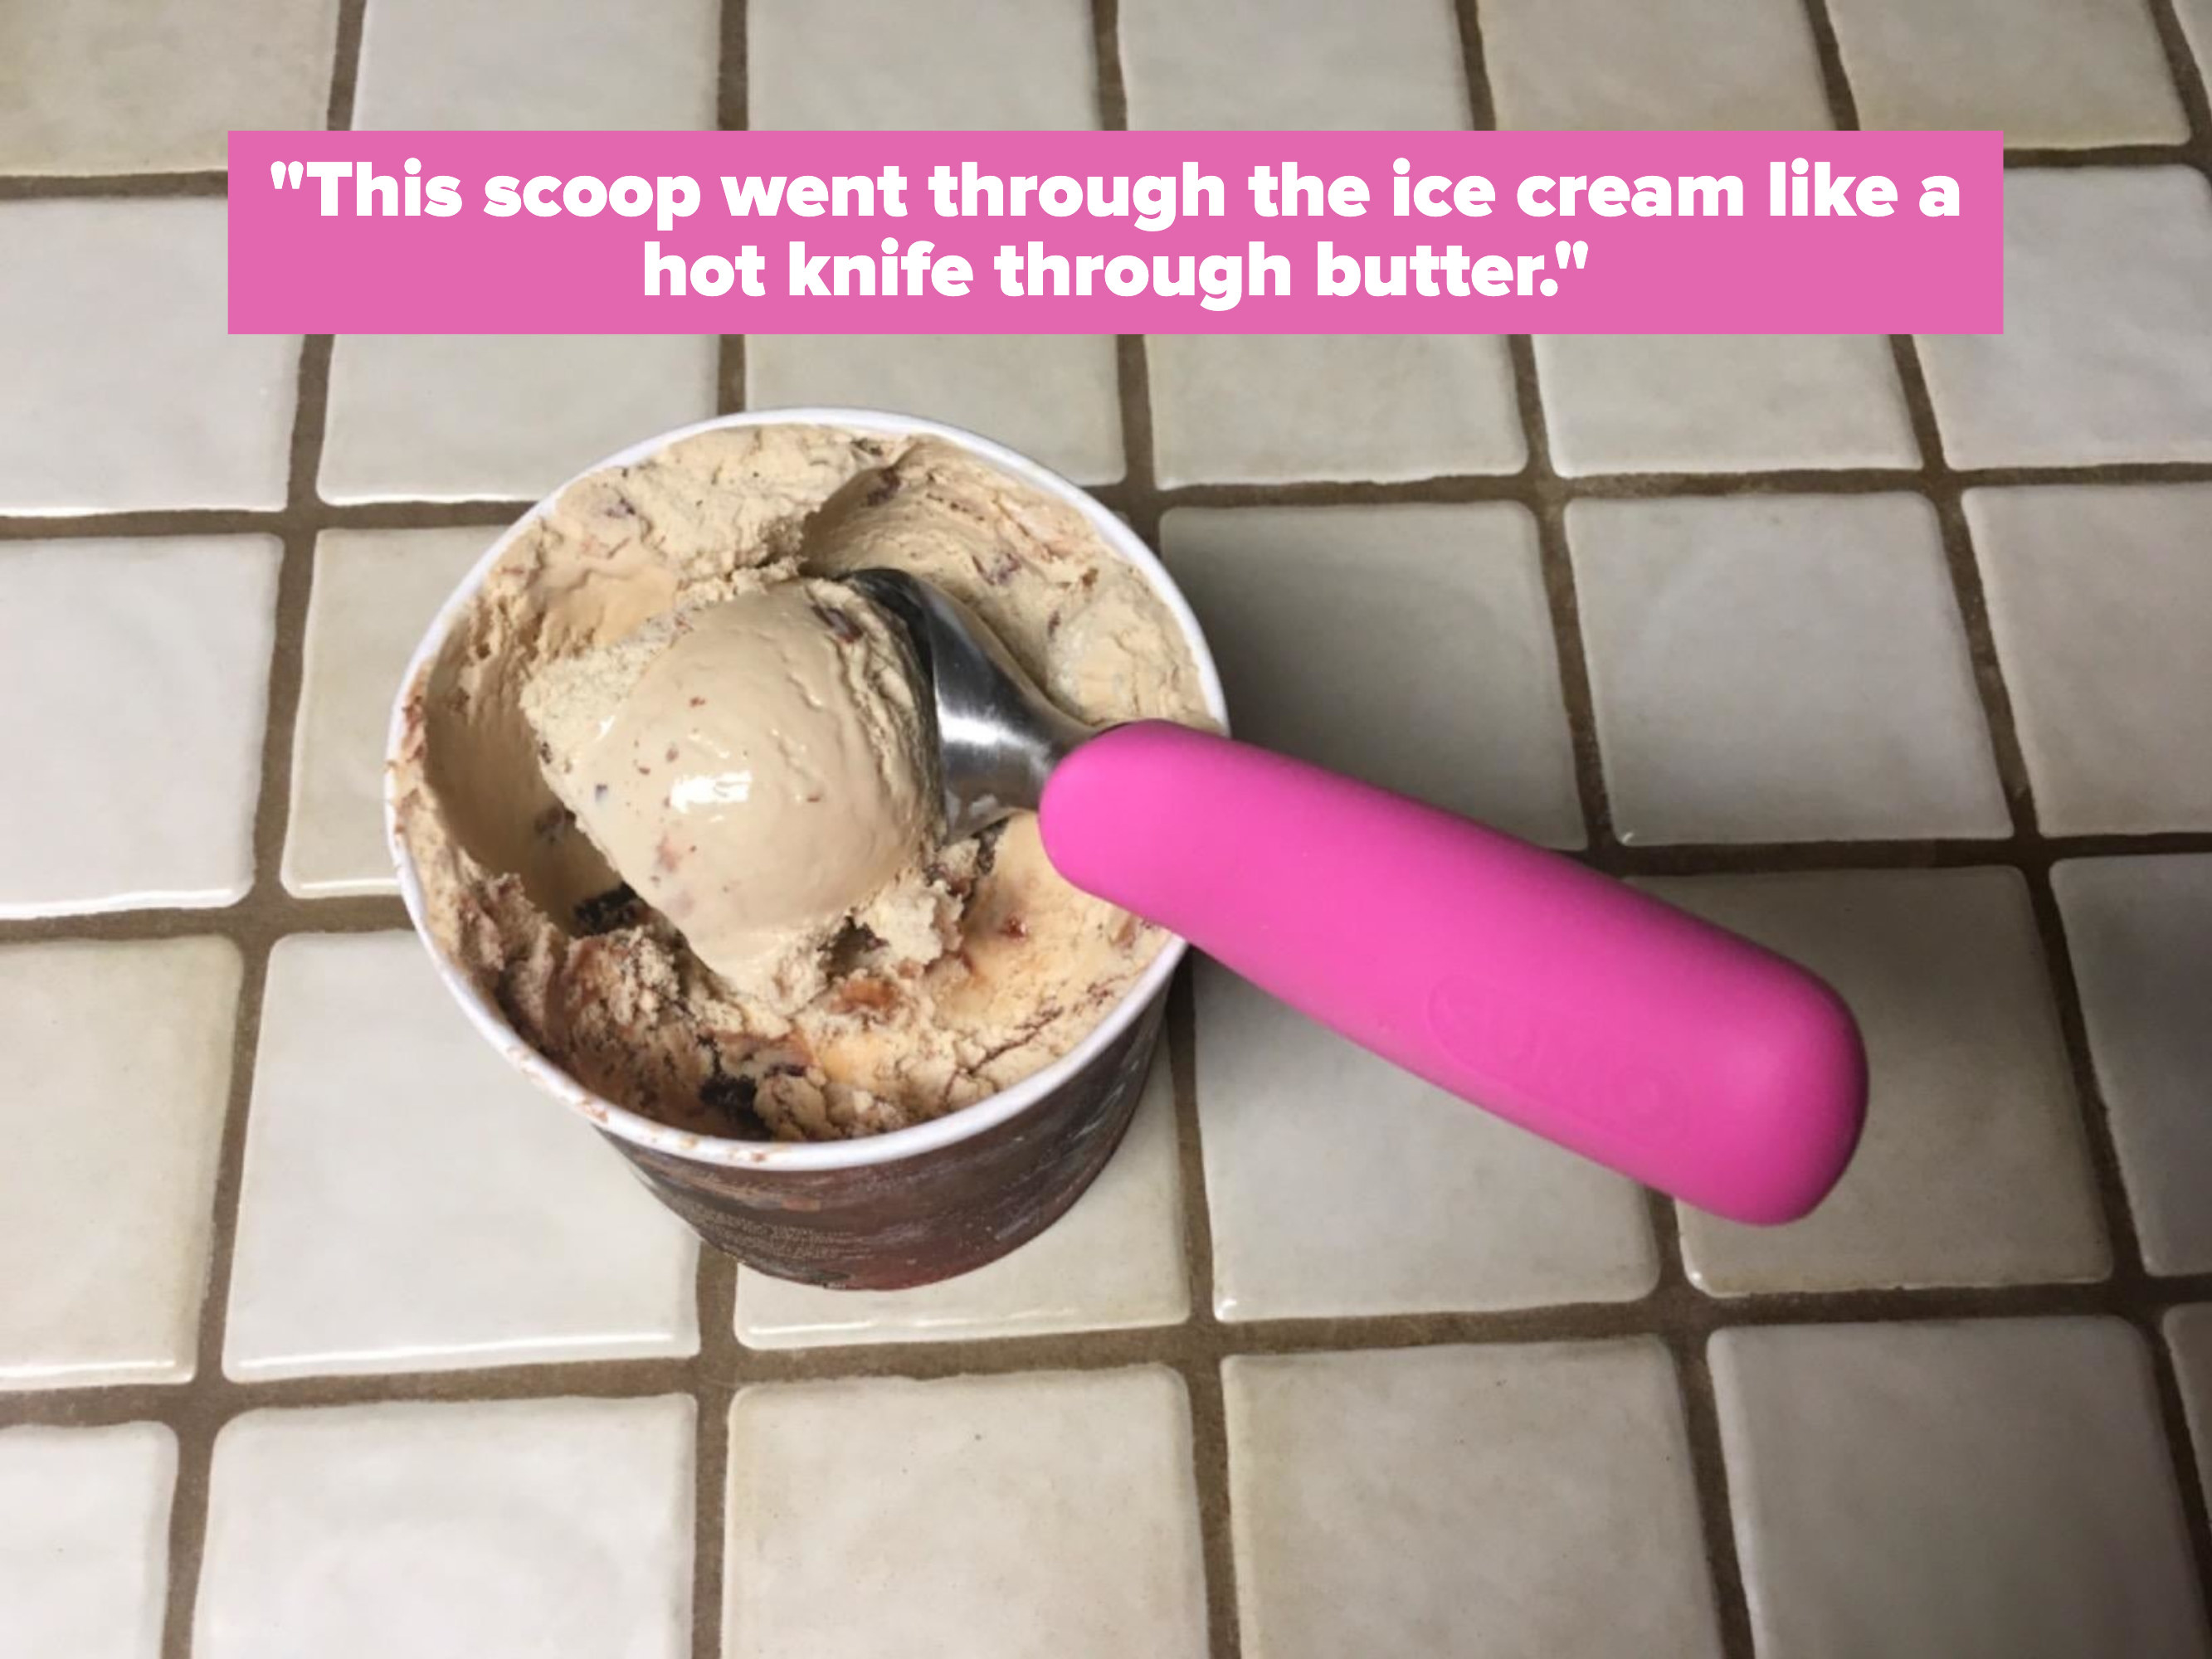 The pink scoop scooping out ice cream with reviewer text 